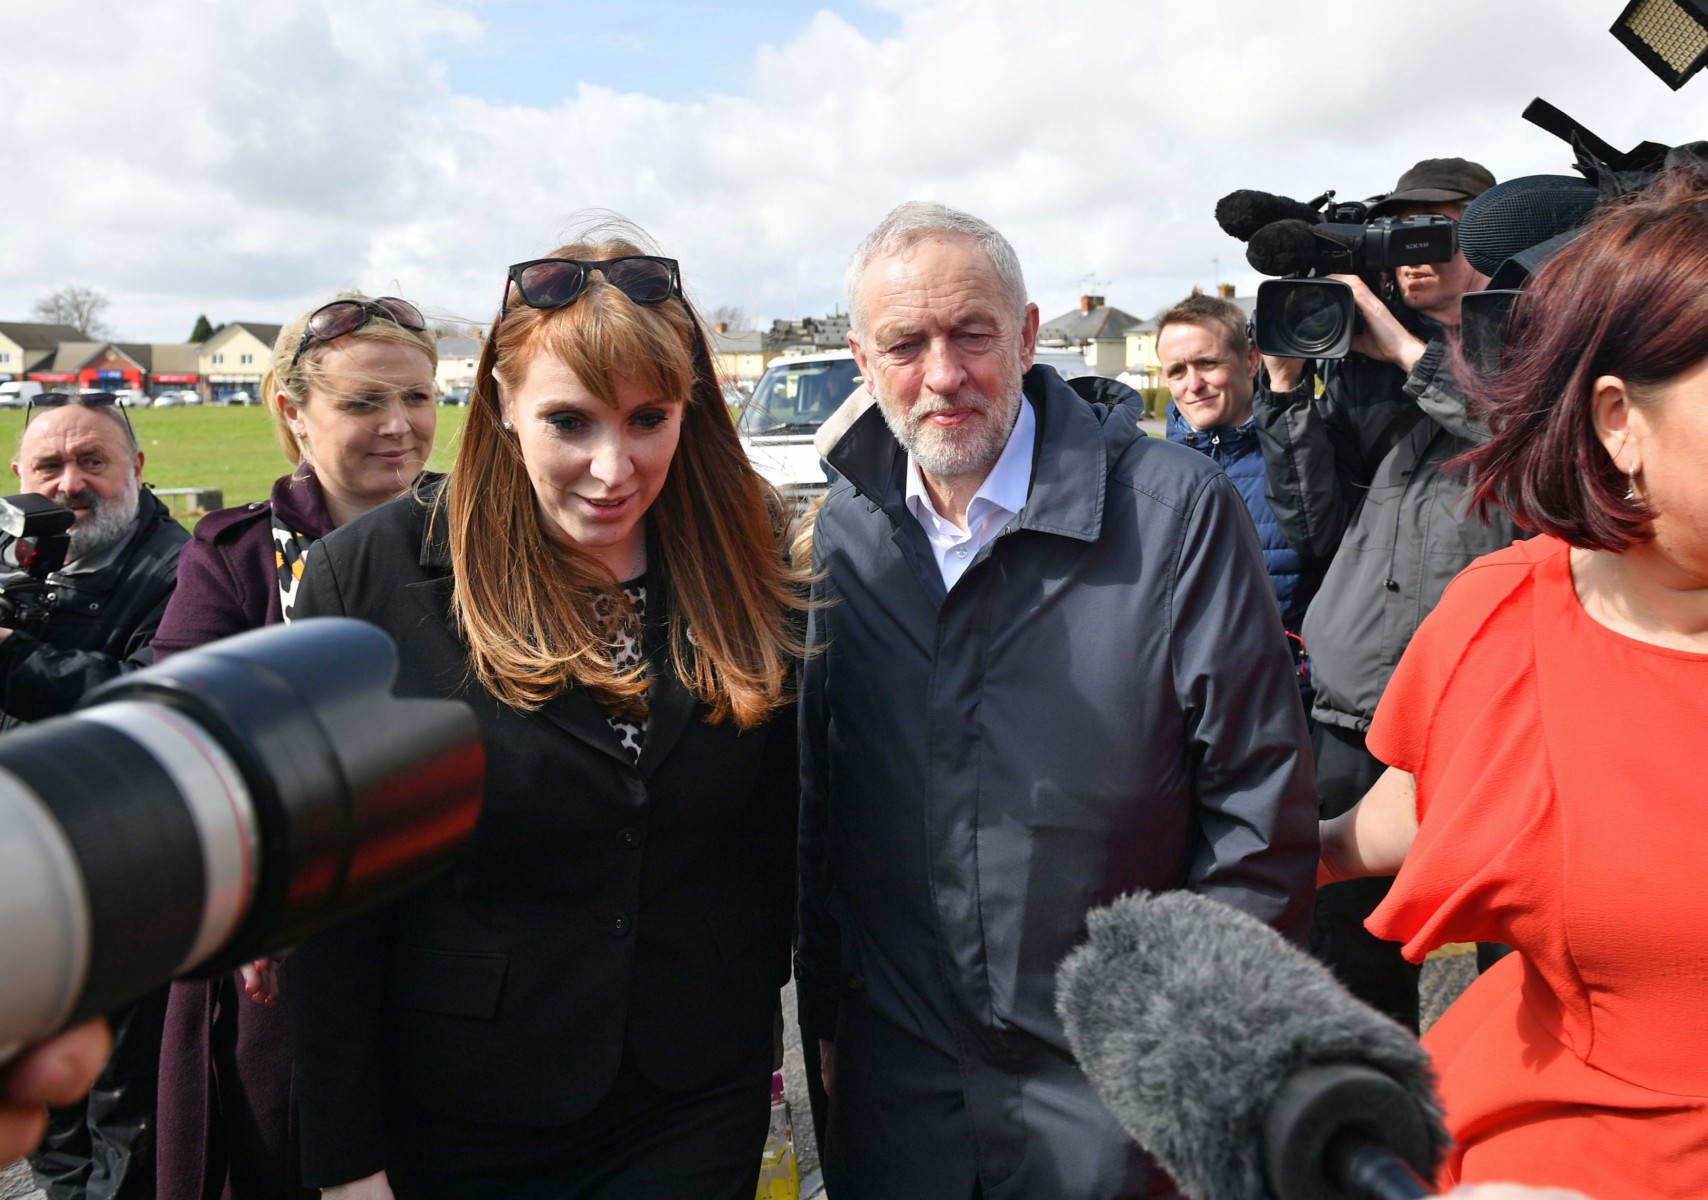 Angela alongside former Labour leader Jeremy Corbyn who will now make way for Keir Starmer